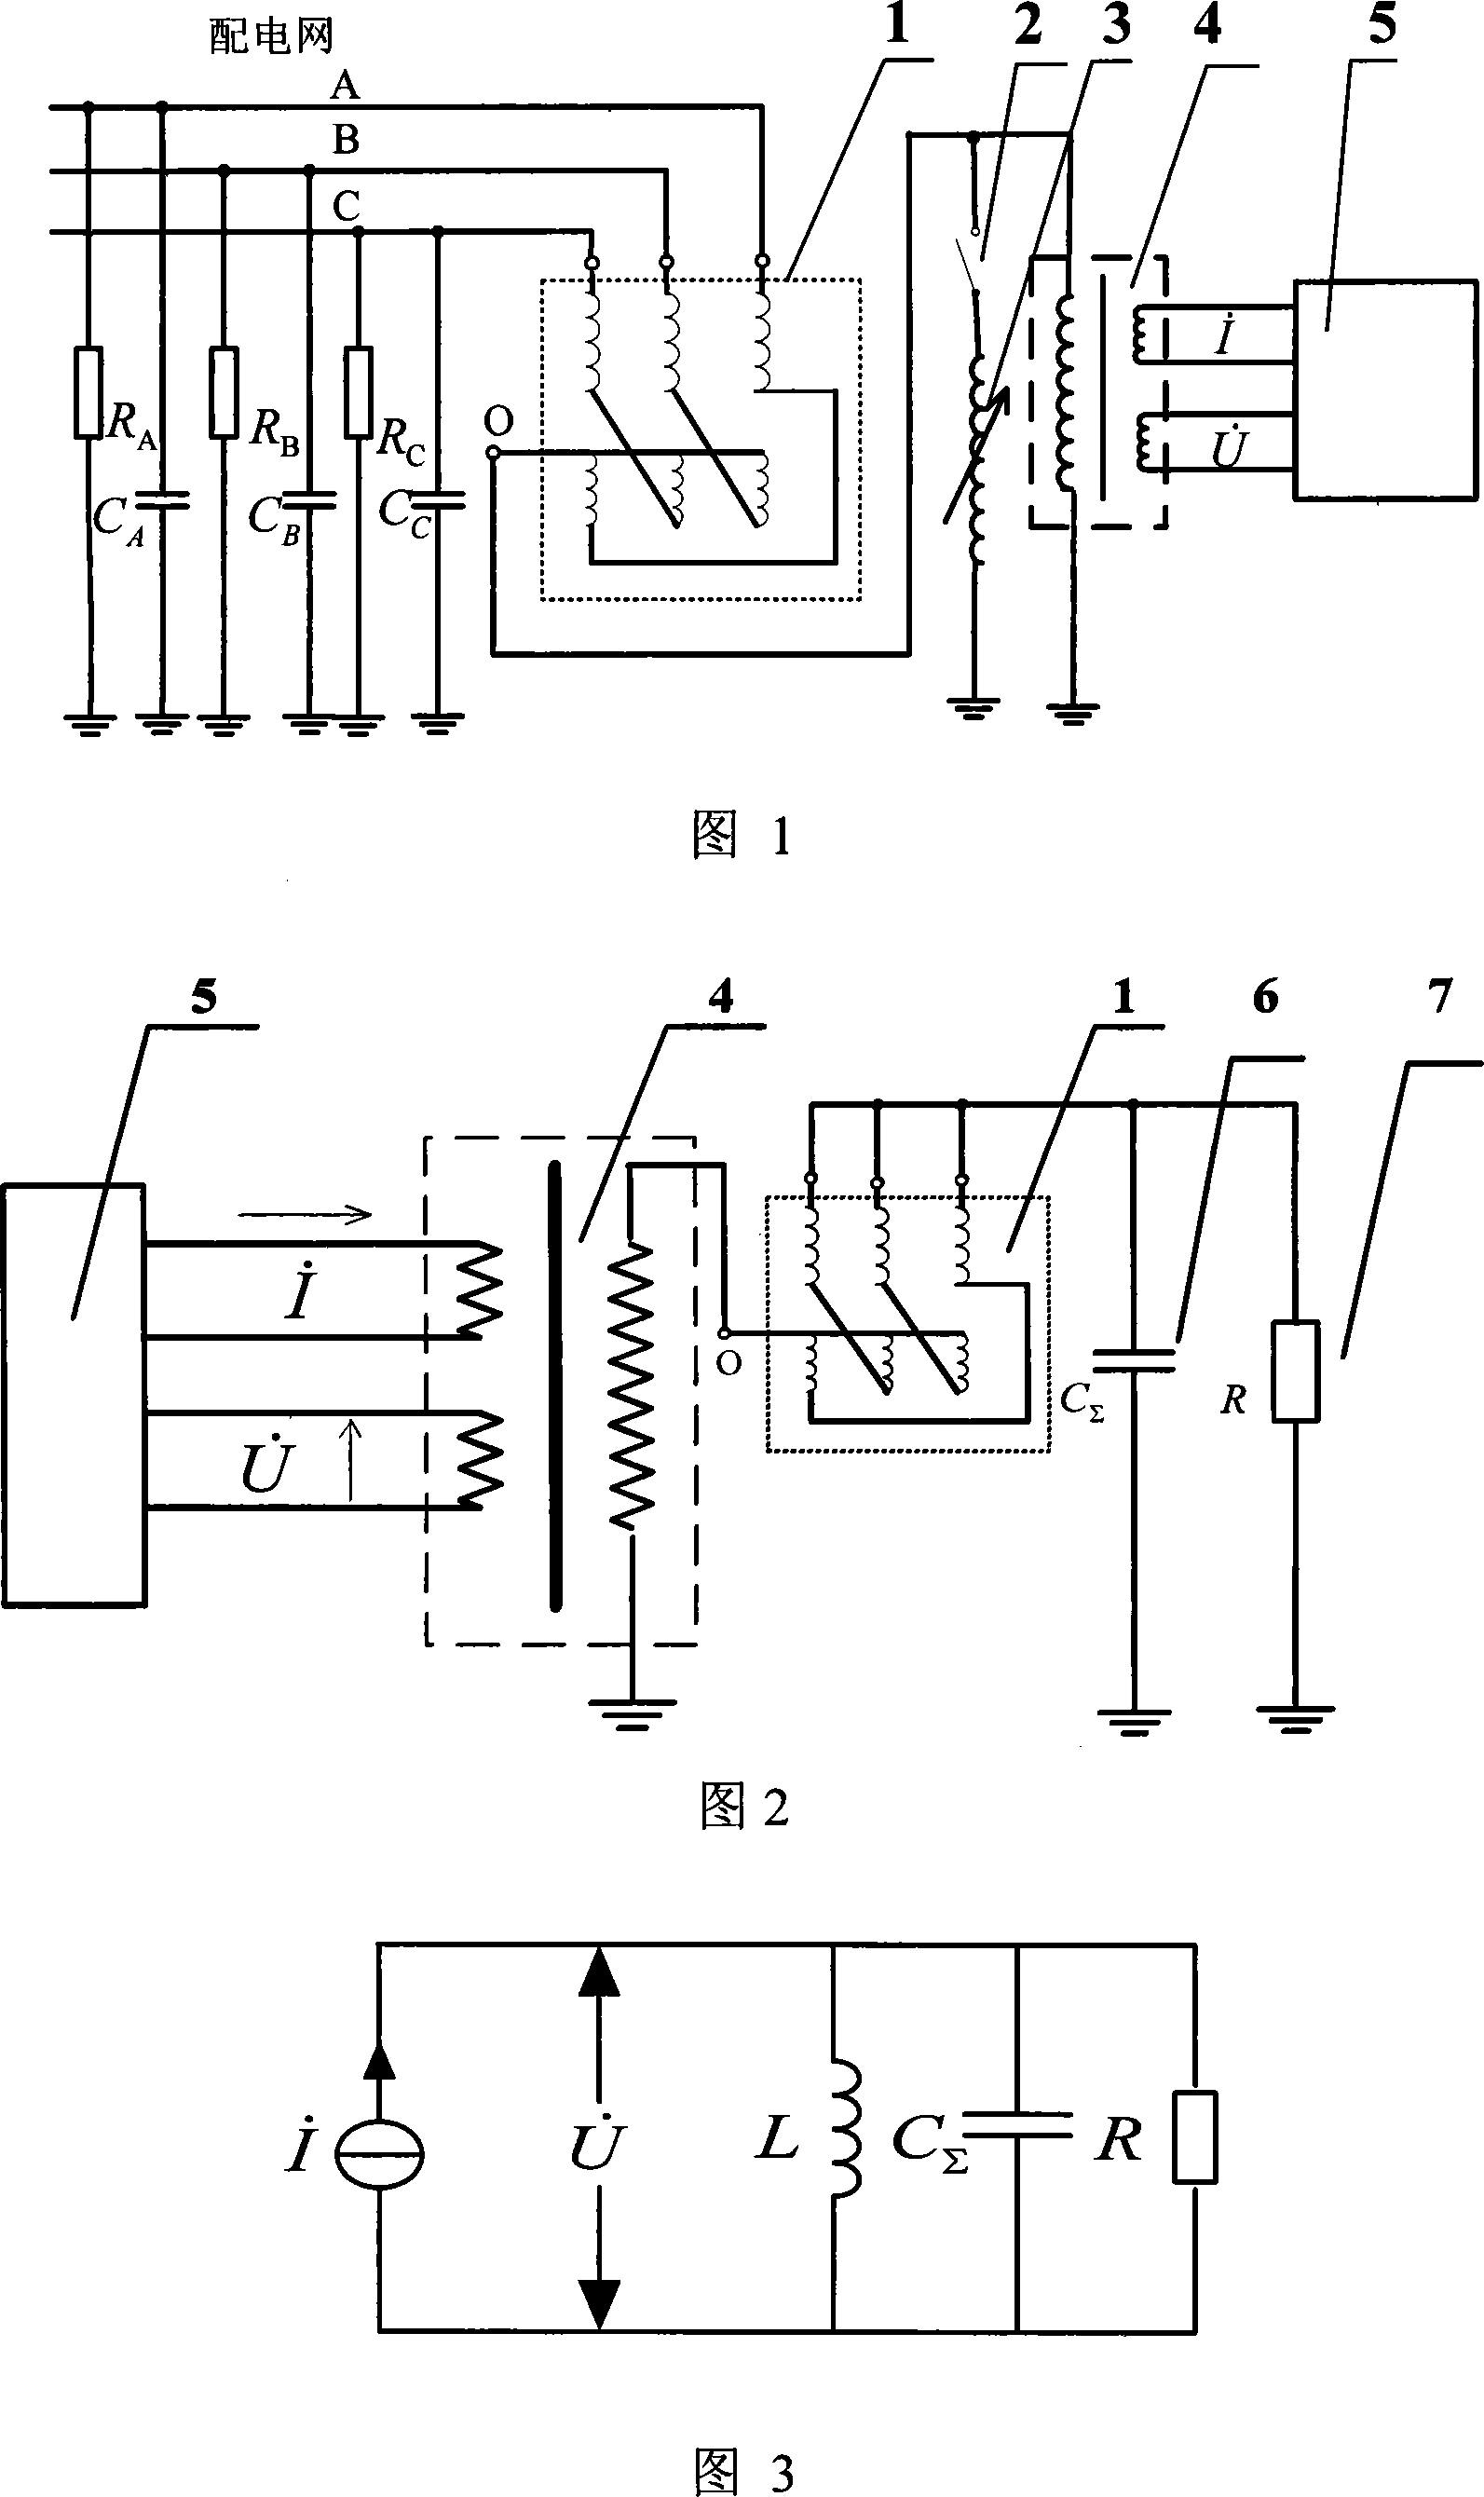 Distribution network earth insulation parameter measuring and controlling method